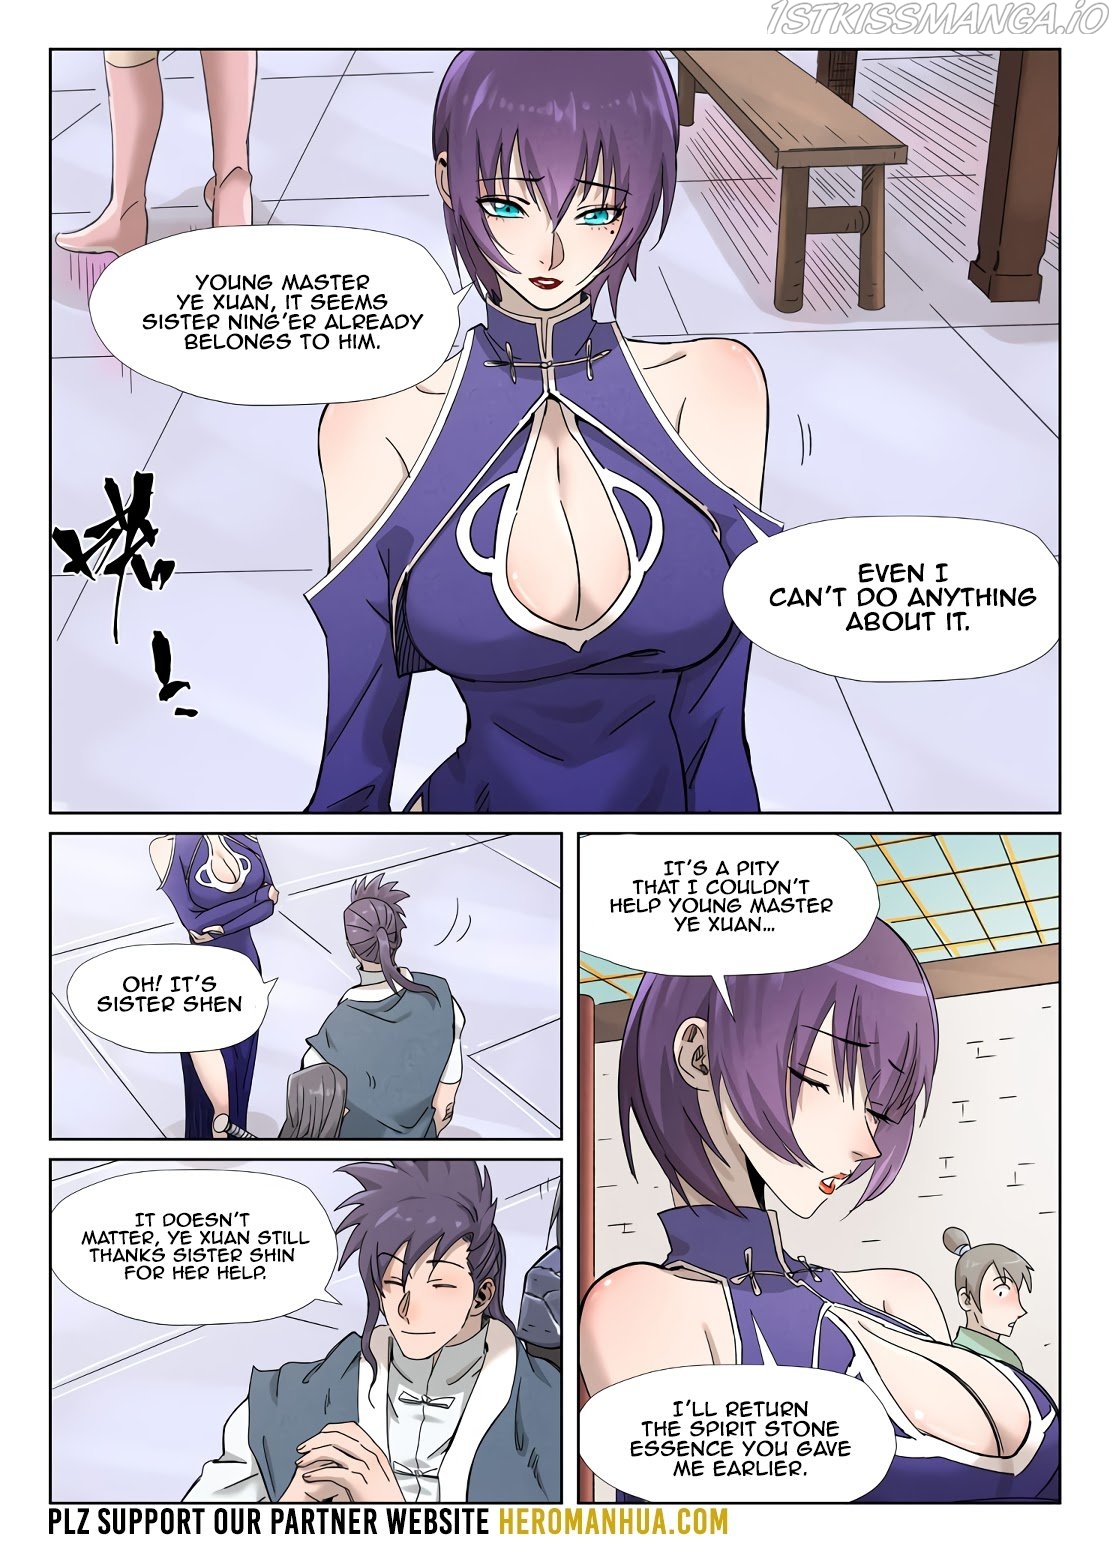 Tales of Demons and Gods Manhua Chapter 343.1 - Page 6